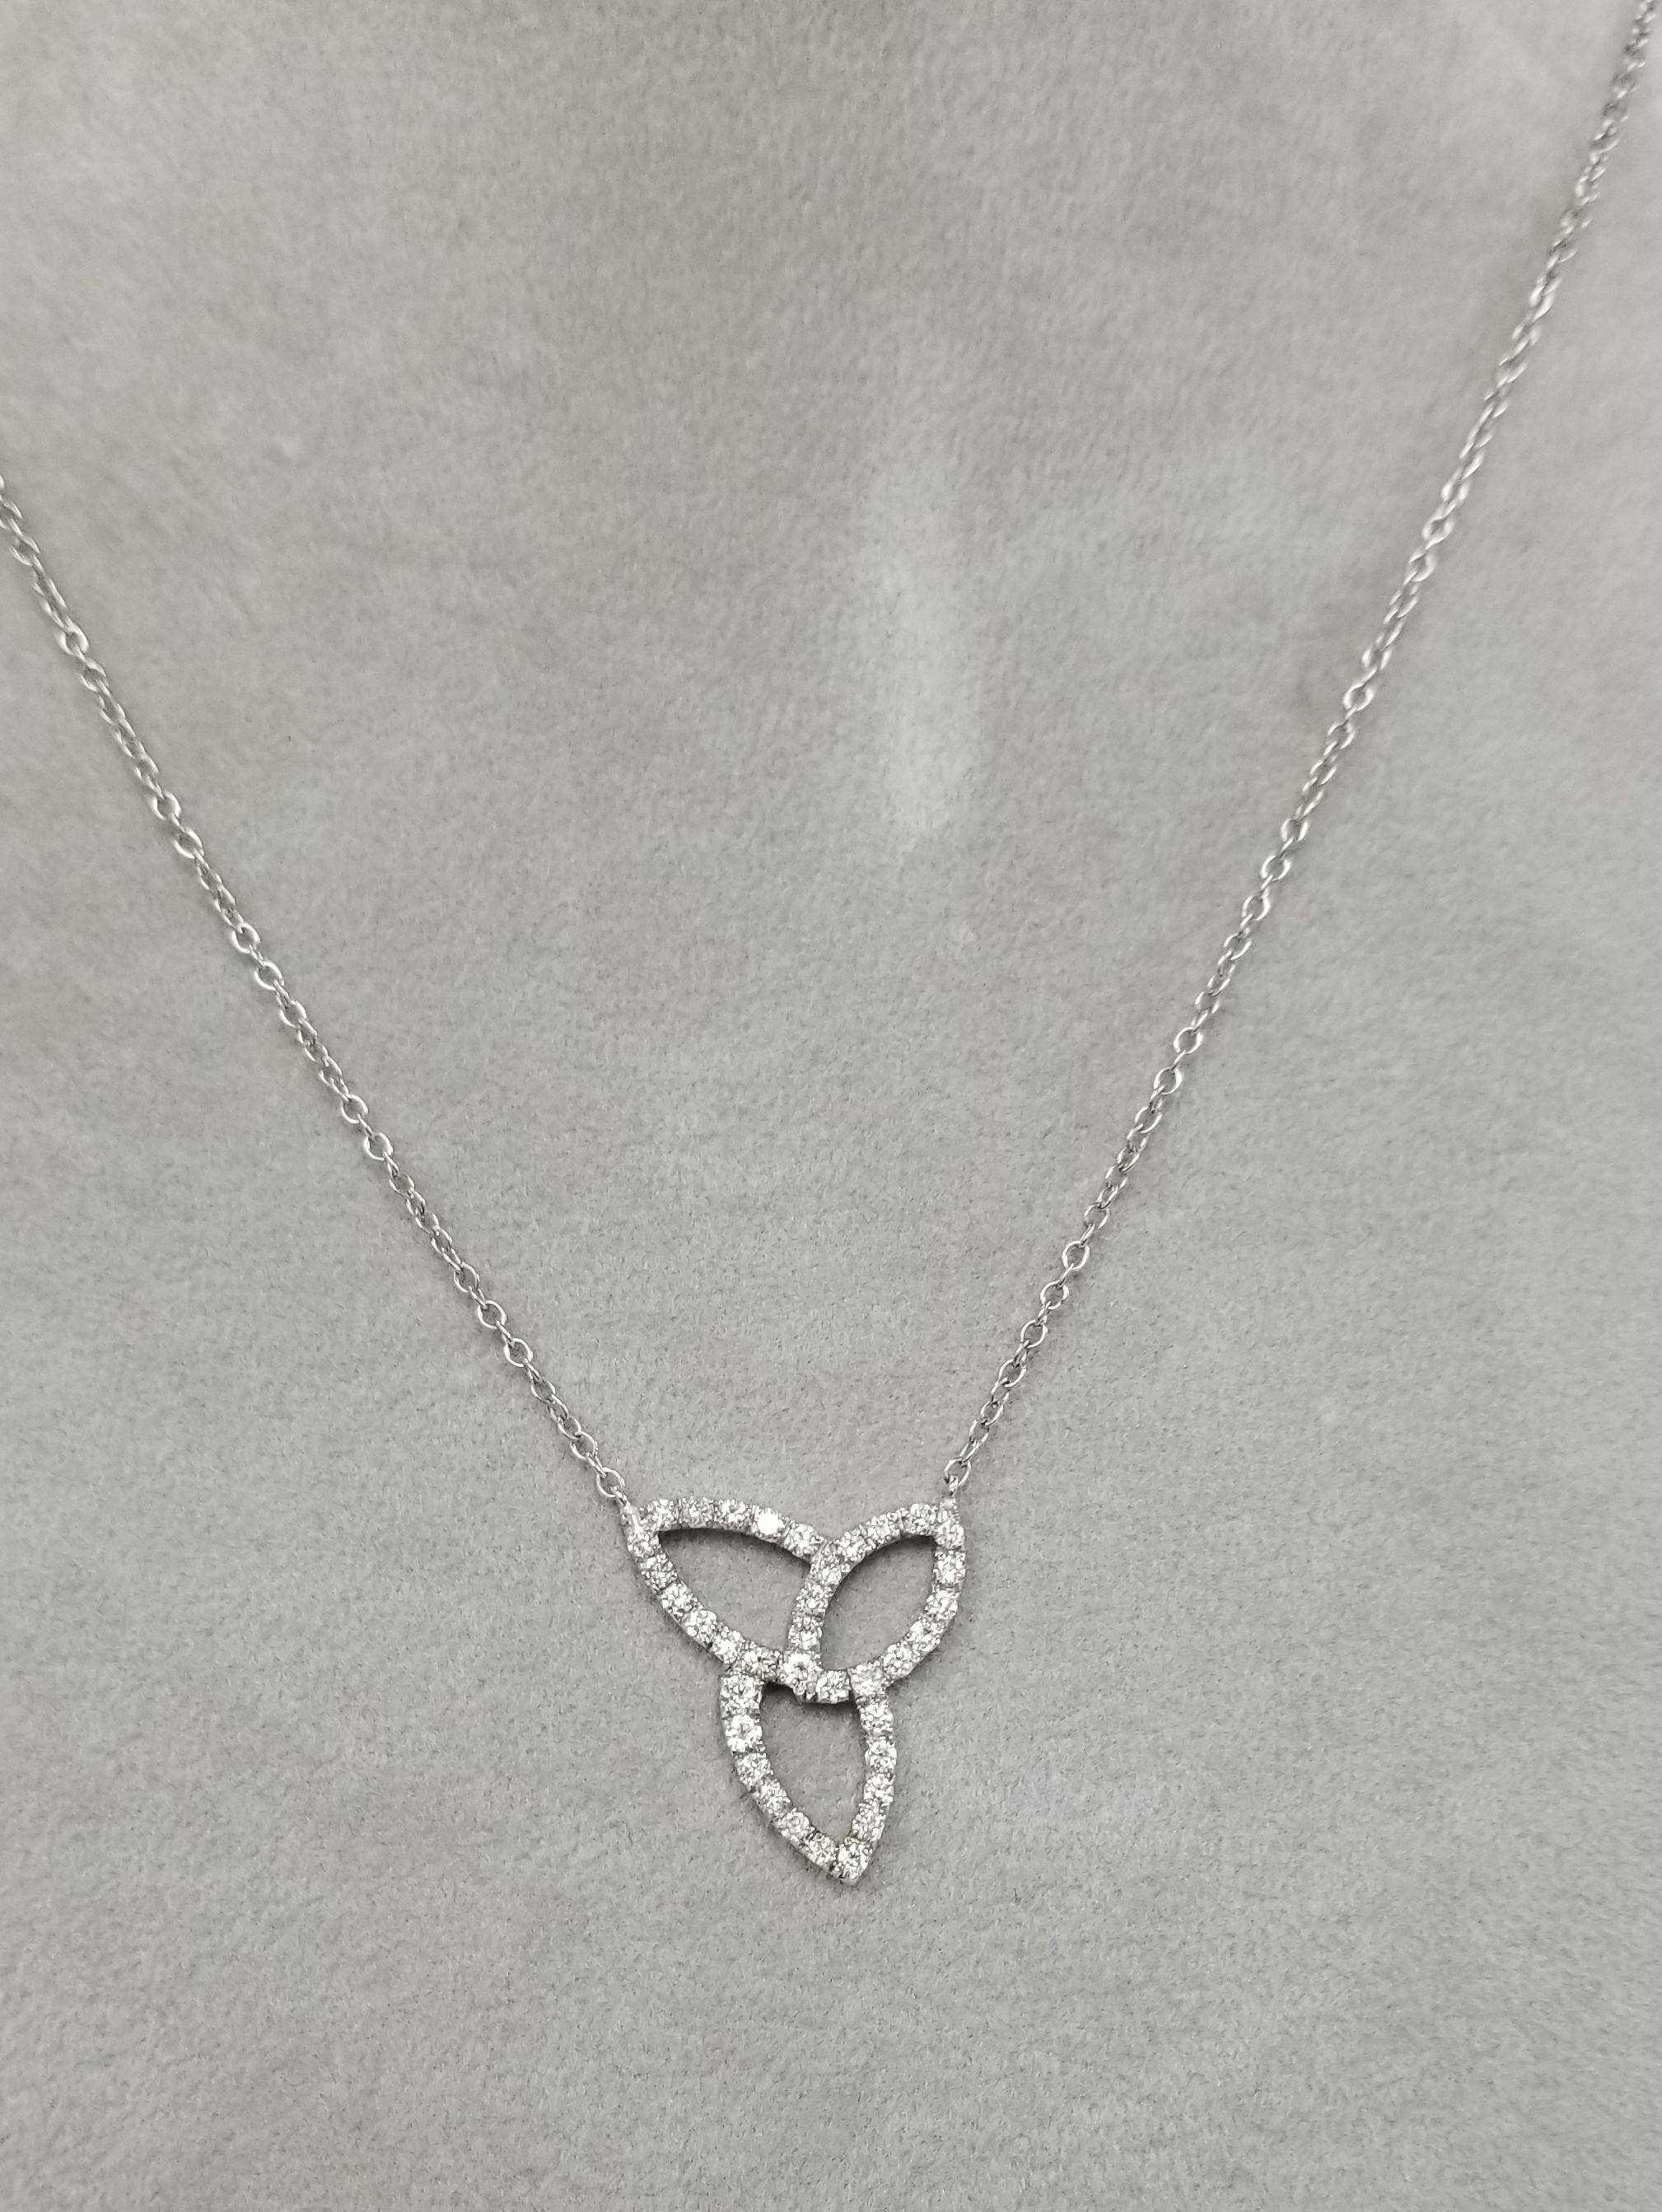 14k white gold diamond free form necklace, containing 40 round full cut diamonds weighing .80pts. on a 18 inch chain.